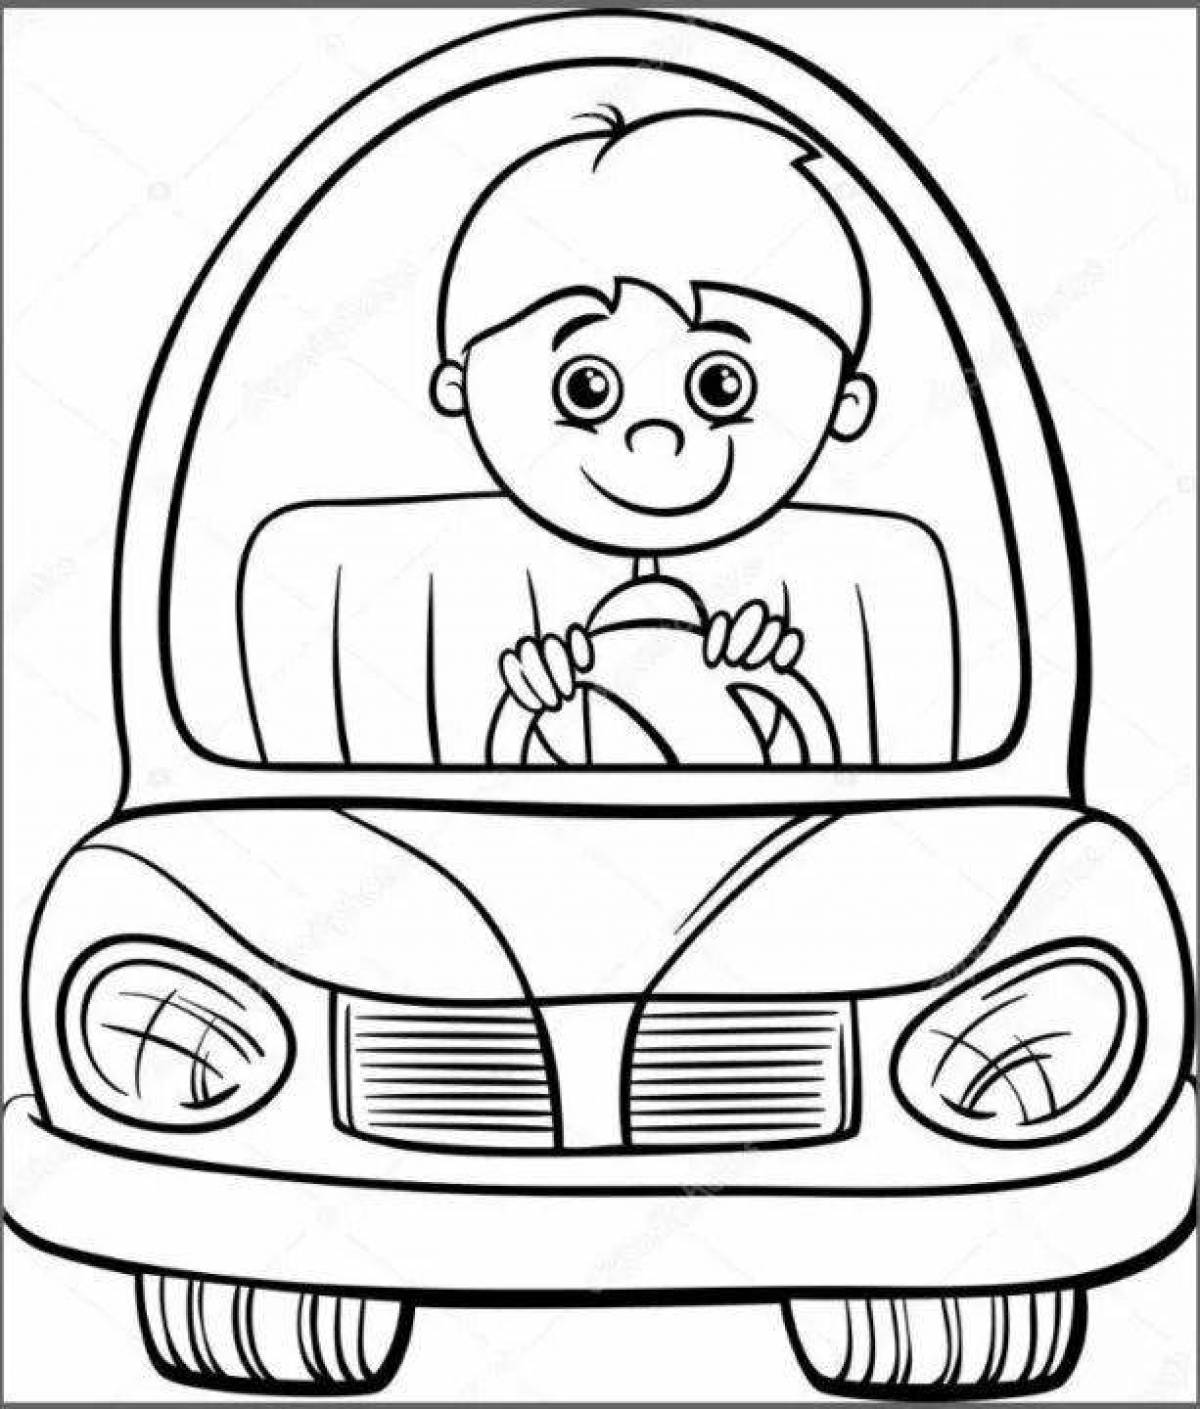 Creative driver coloring book for kids